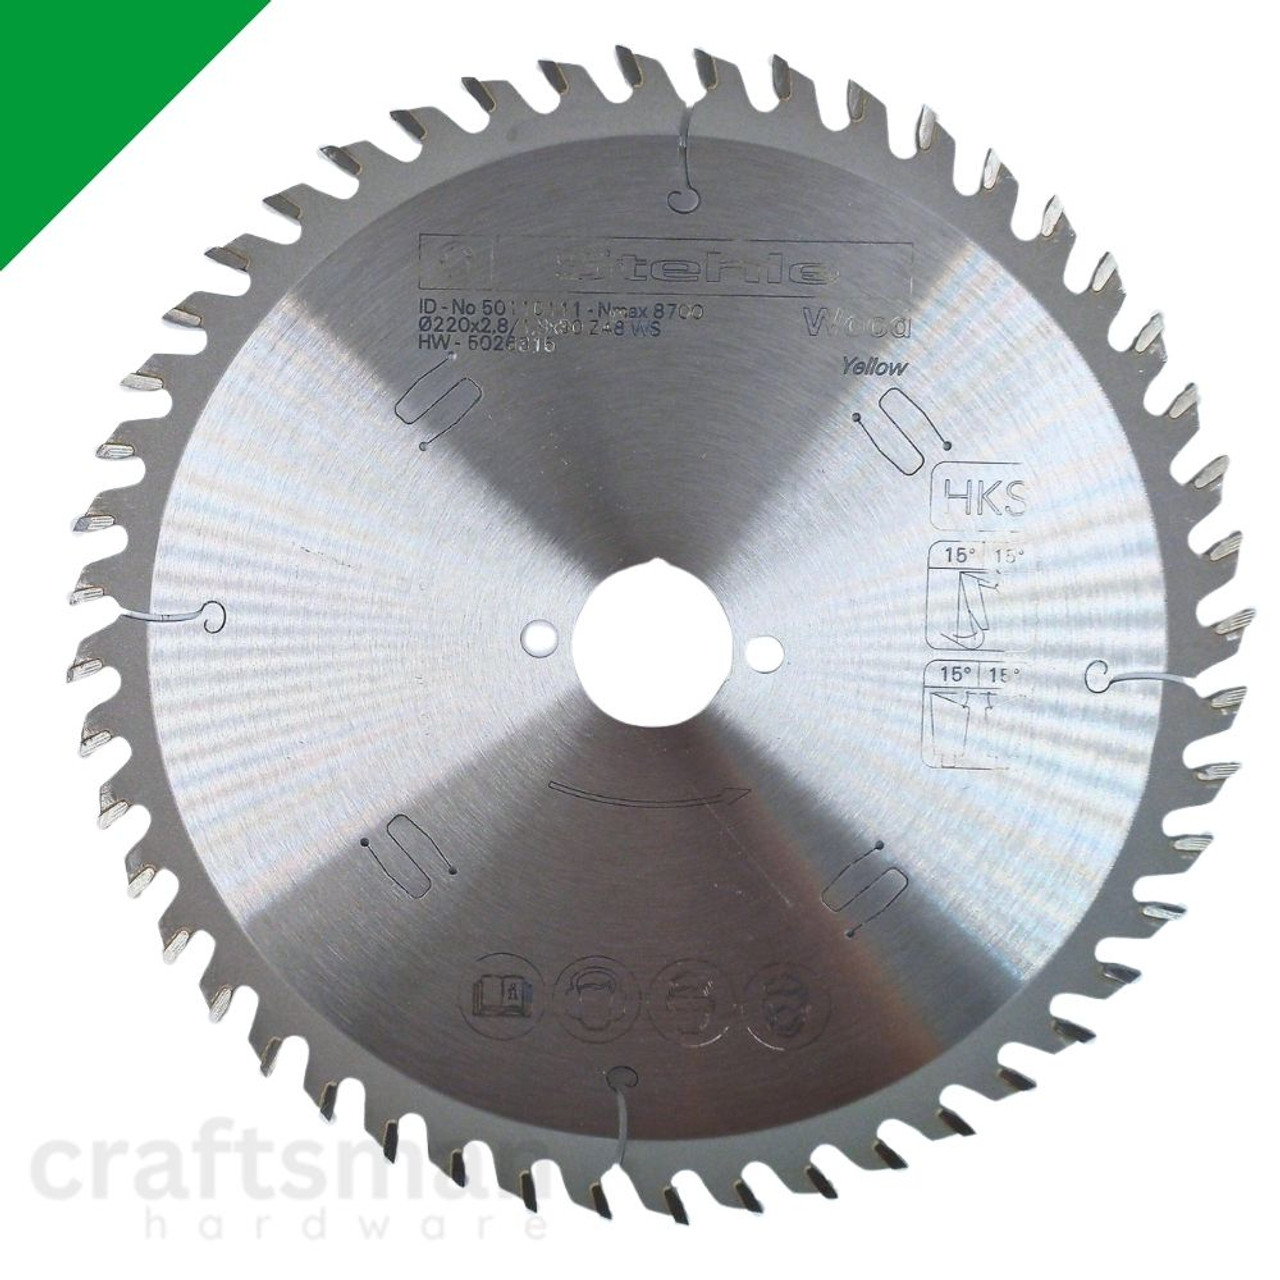 STEHLE Saw Blades | HKS BOARD Circular Saw Blades 220mm with 30mm Bore in Board